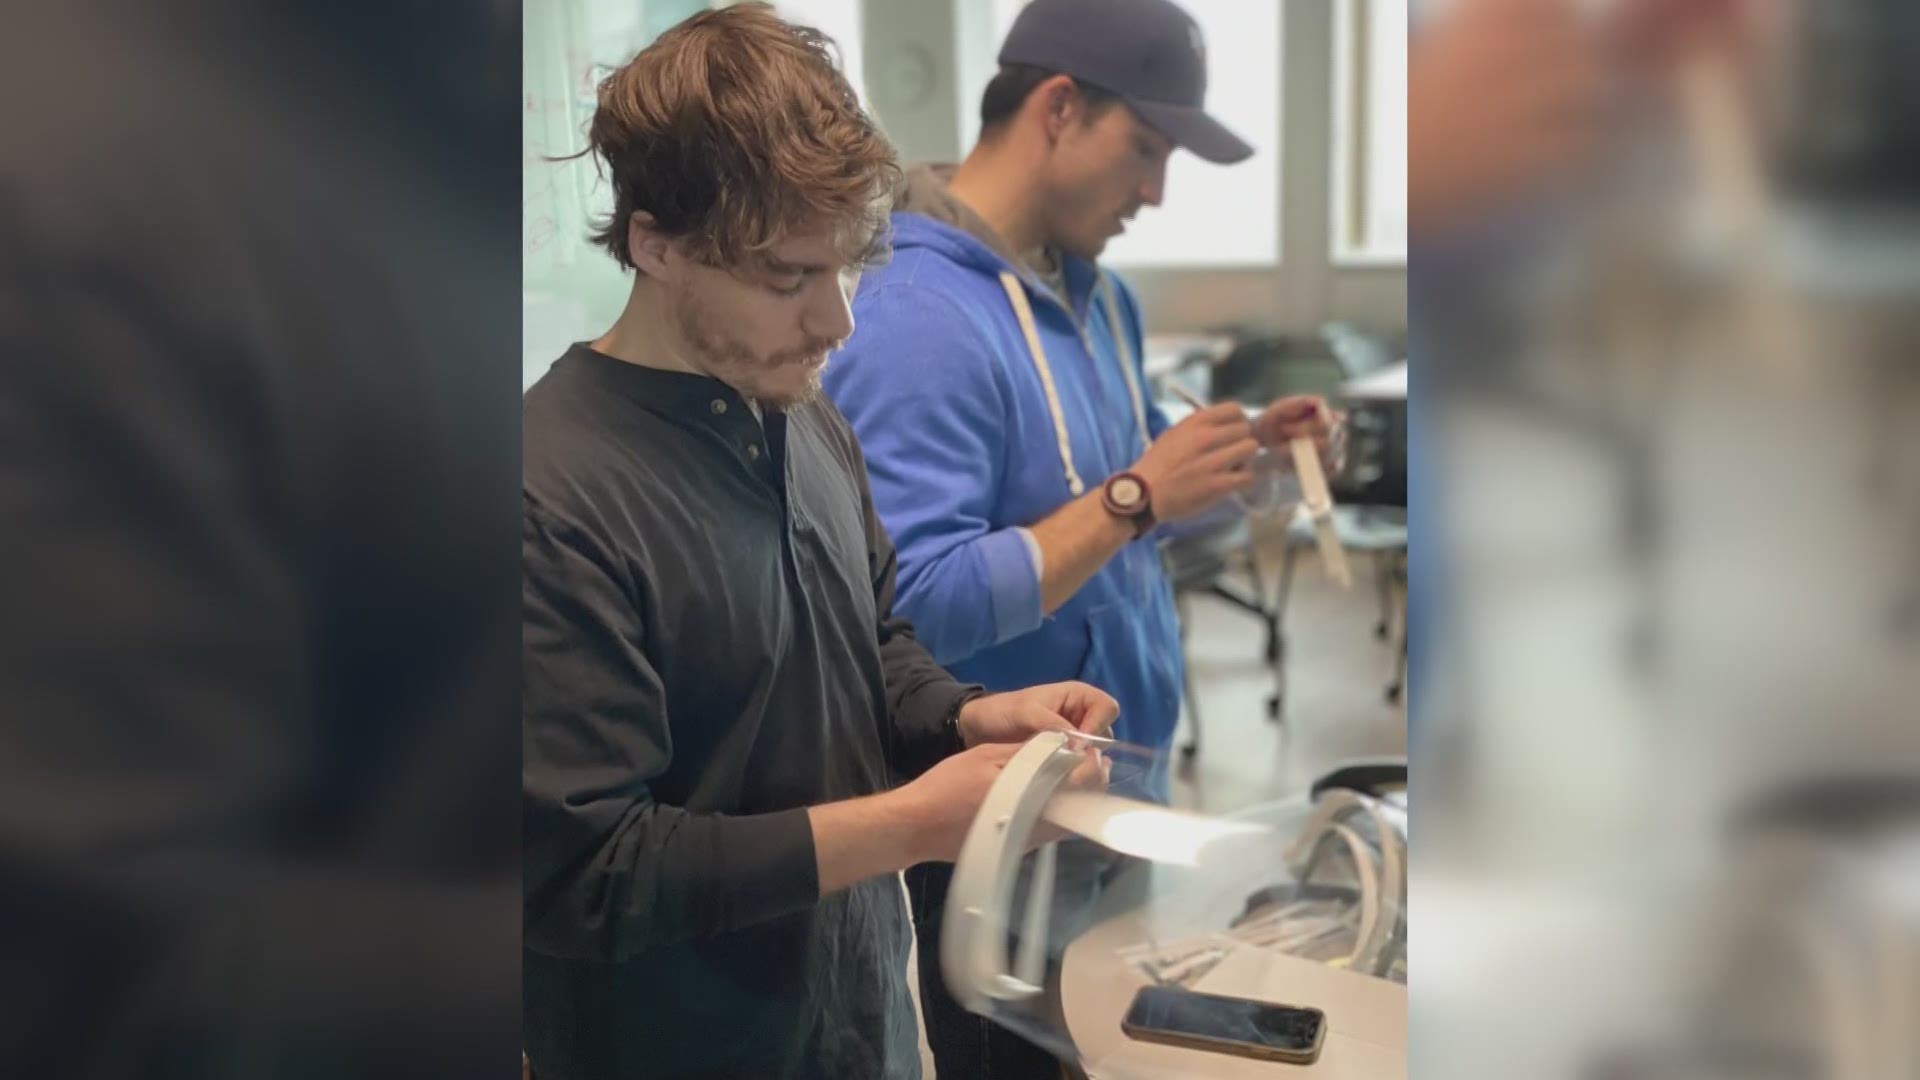 Two engineering students at USM are printing face shields to help essential workers.